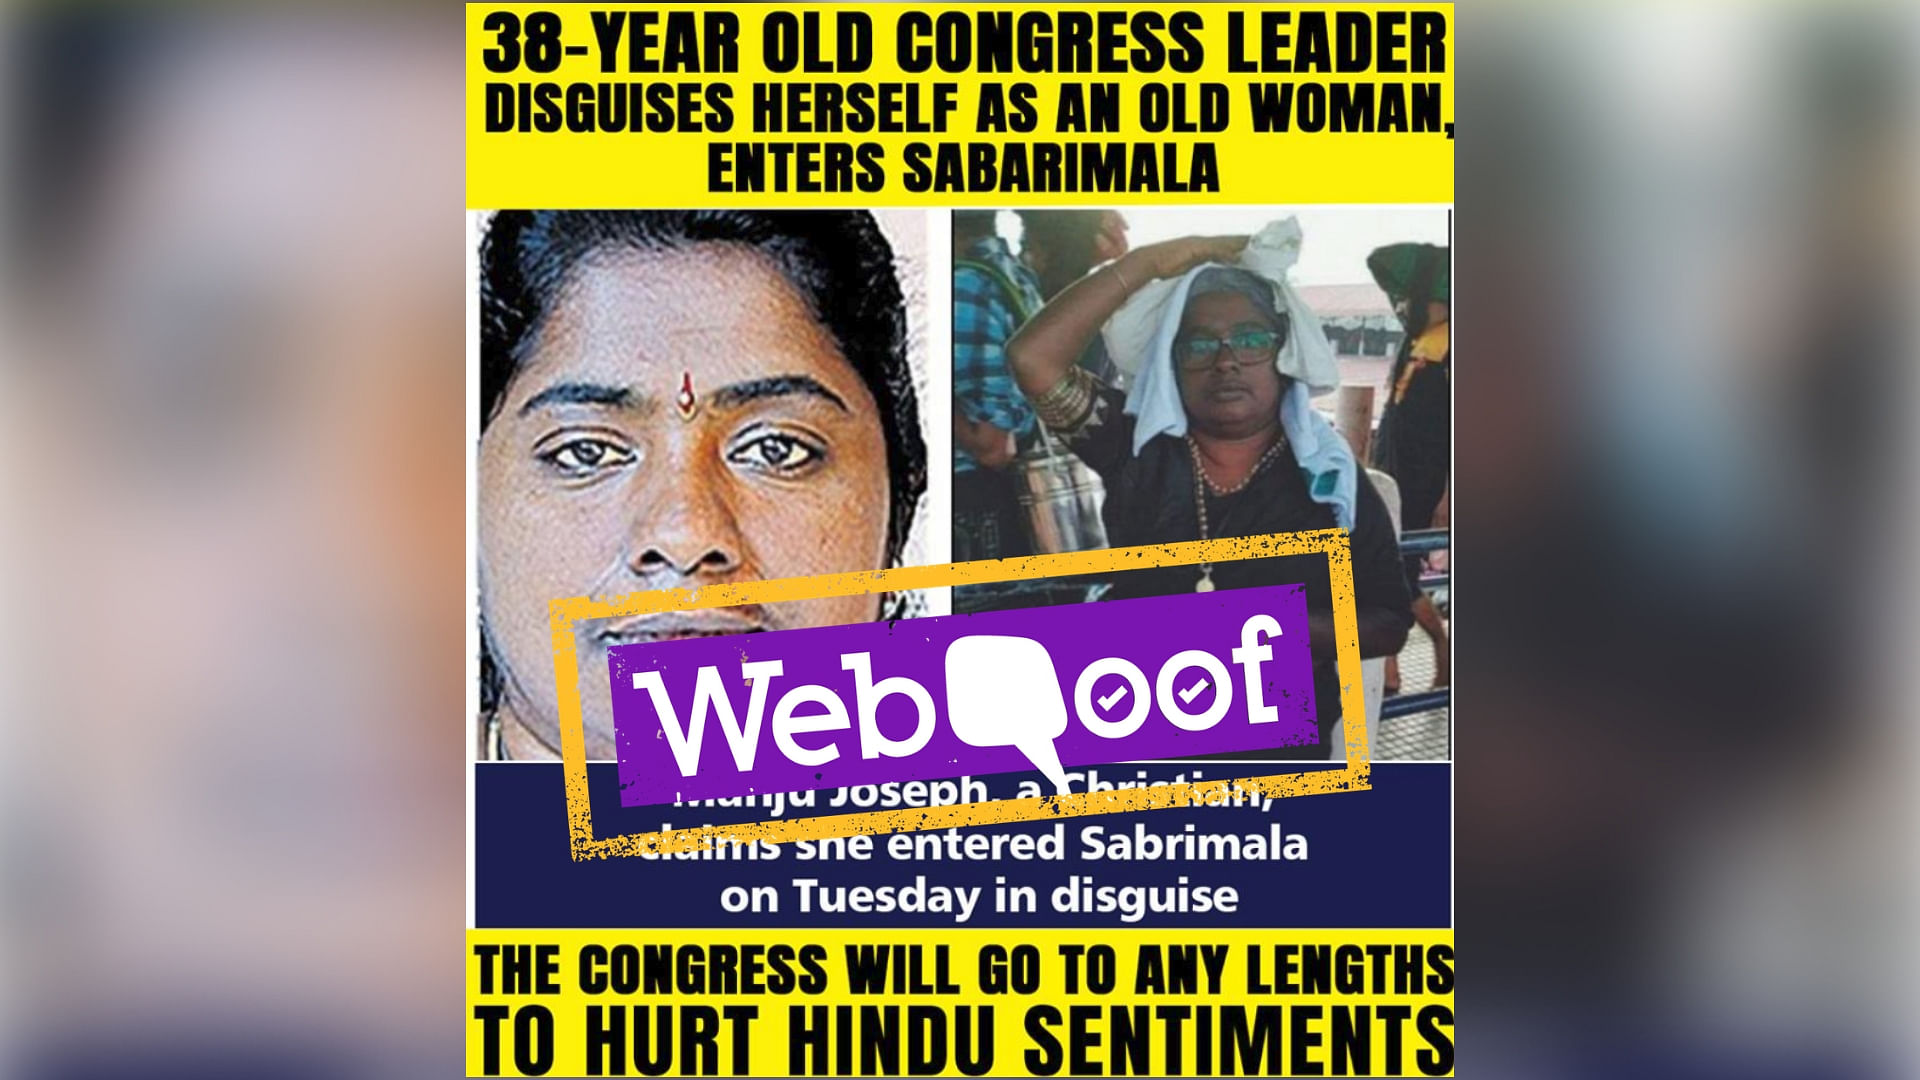 SP Manju, who entered Sabarimala under the guise of an old woman, is neither from the Congress, nor is she Christian.